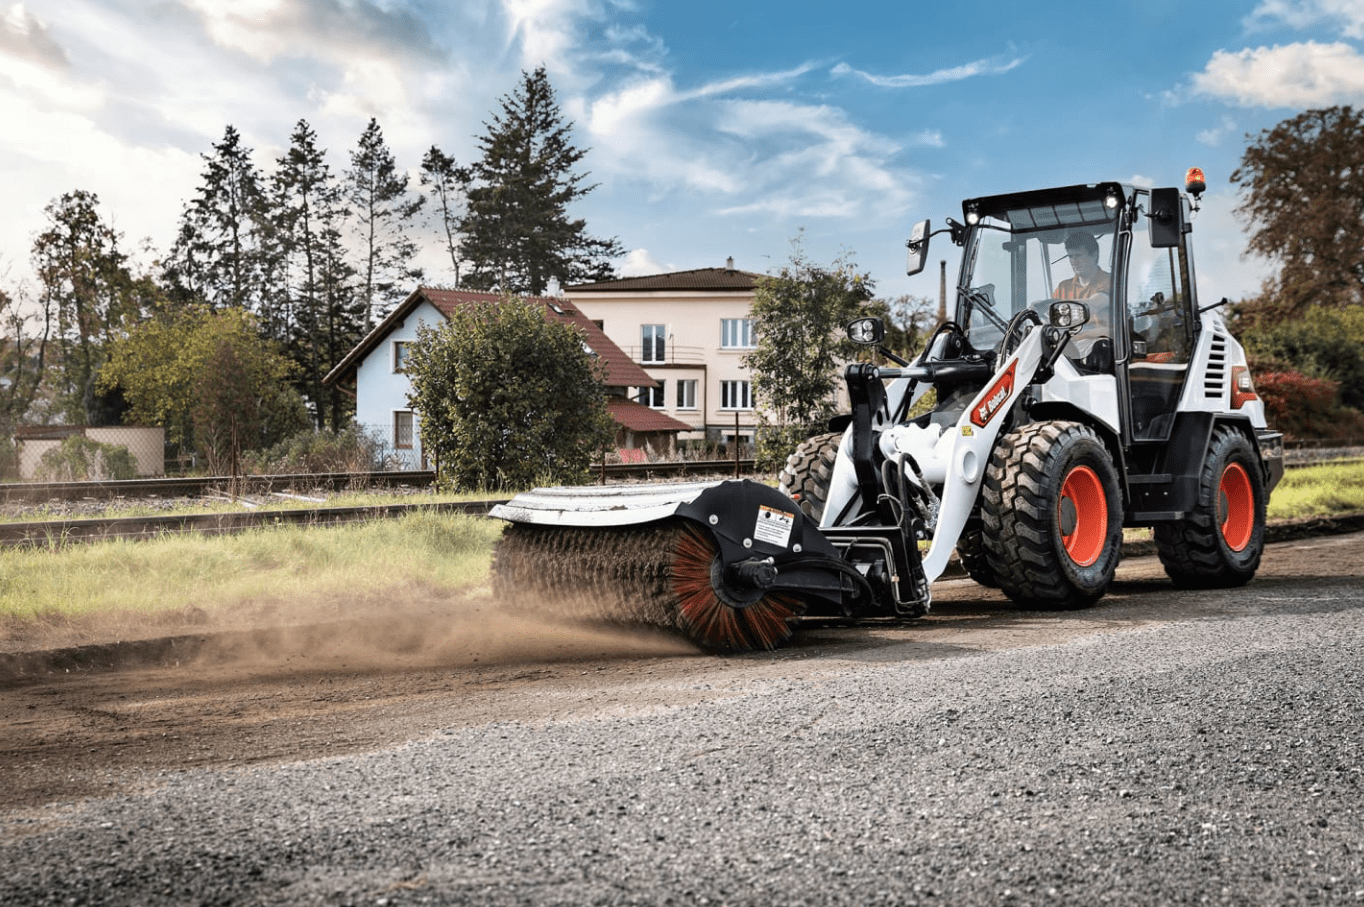 Browse Specs and more for the Bobcat L85 Compact Wheel Loader - Bobcat of Huntsville